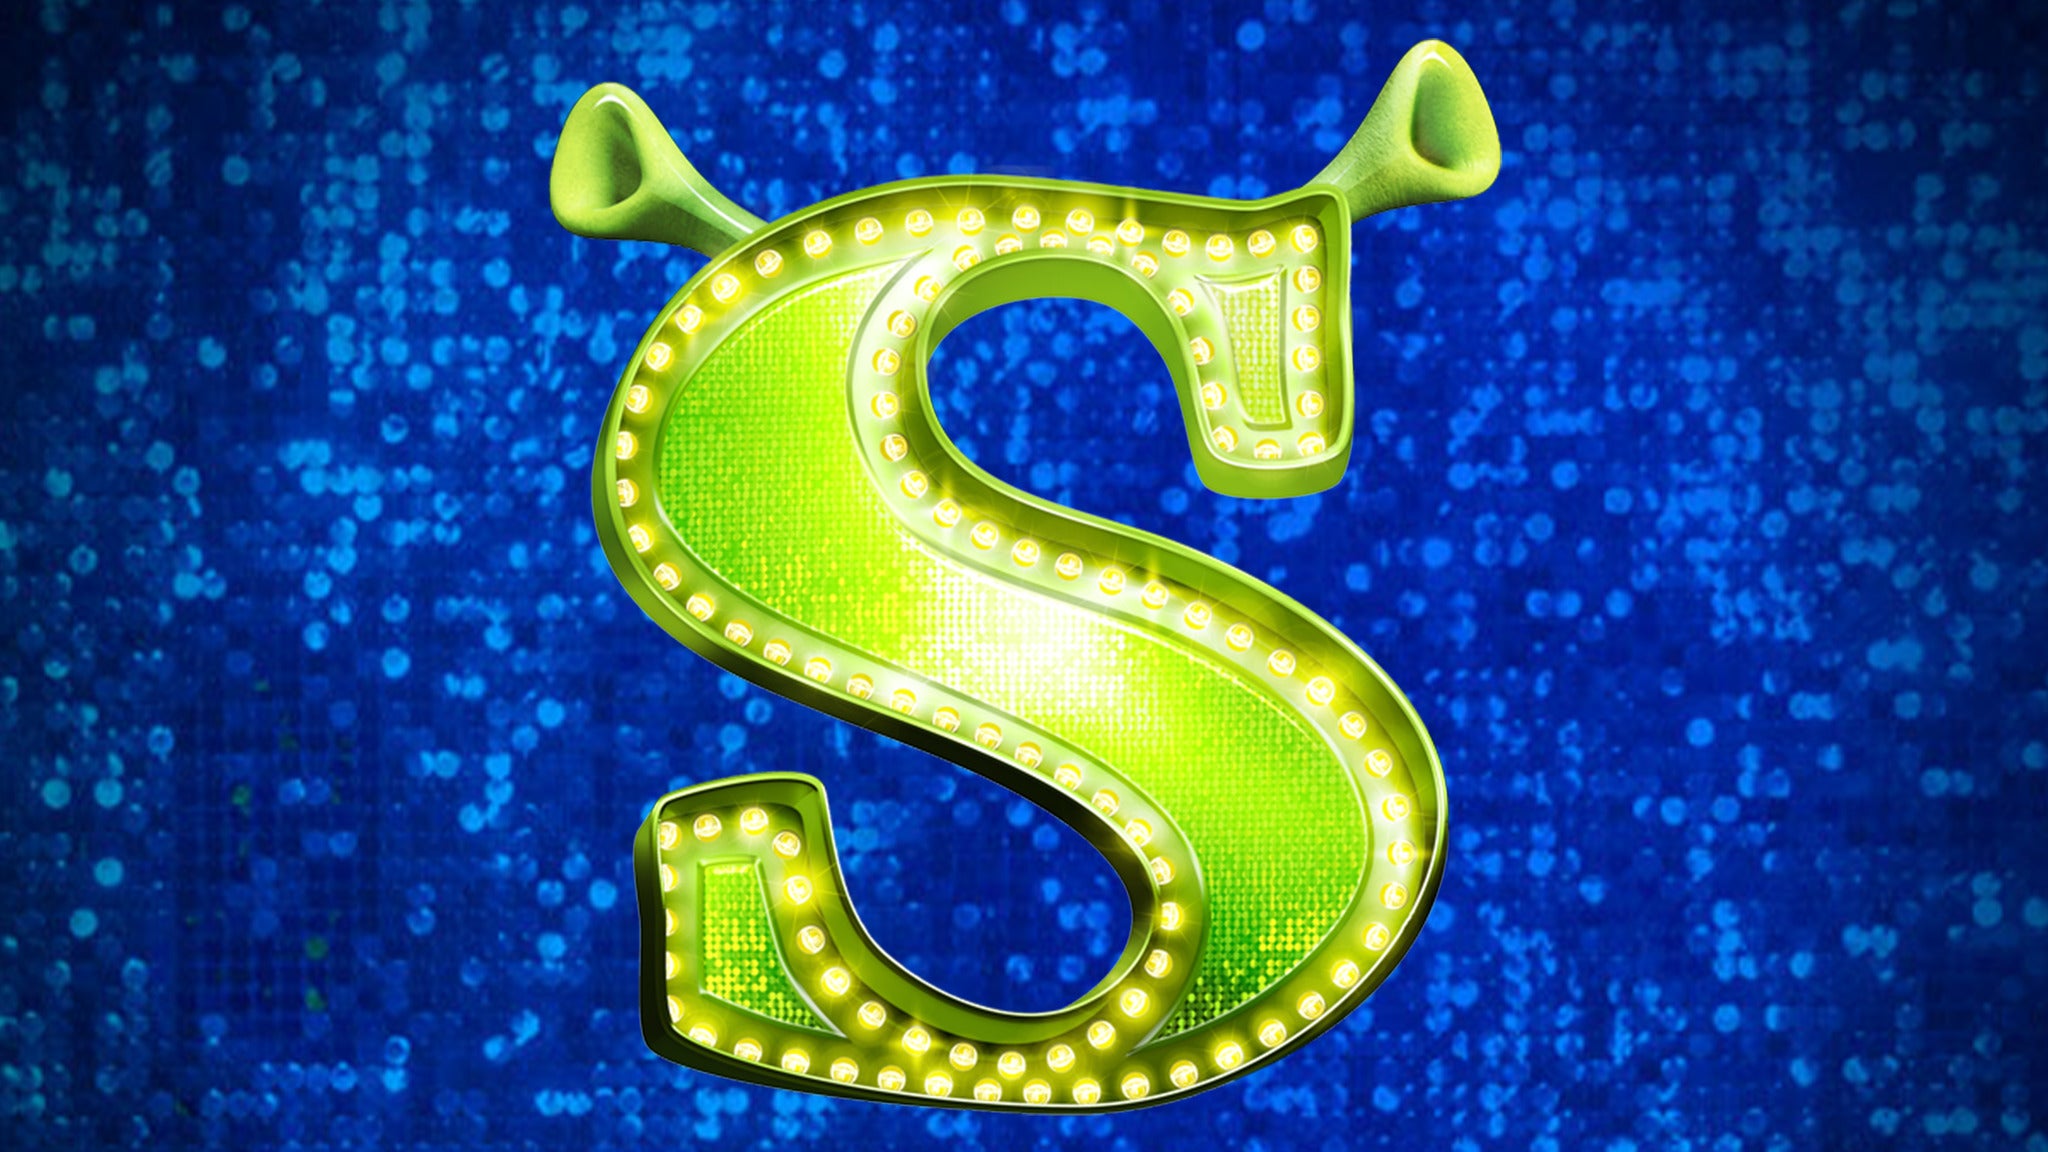 Image used with permission from Ticketmaster | Shrek The Musical TYA tickets